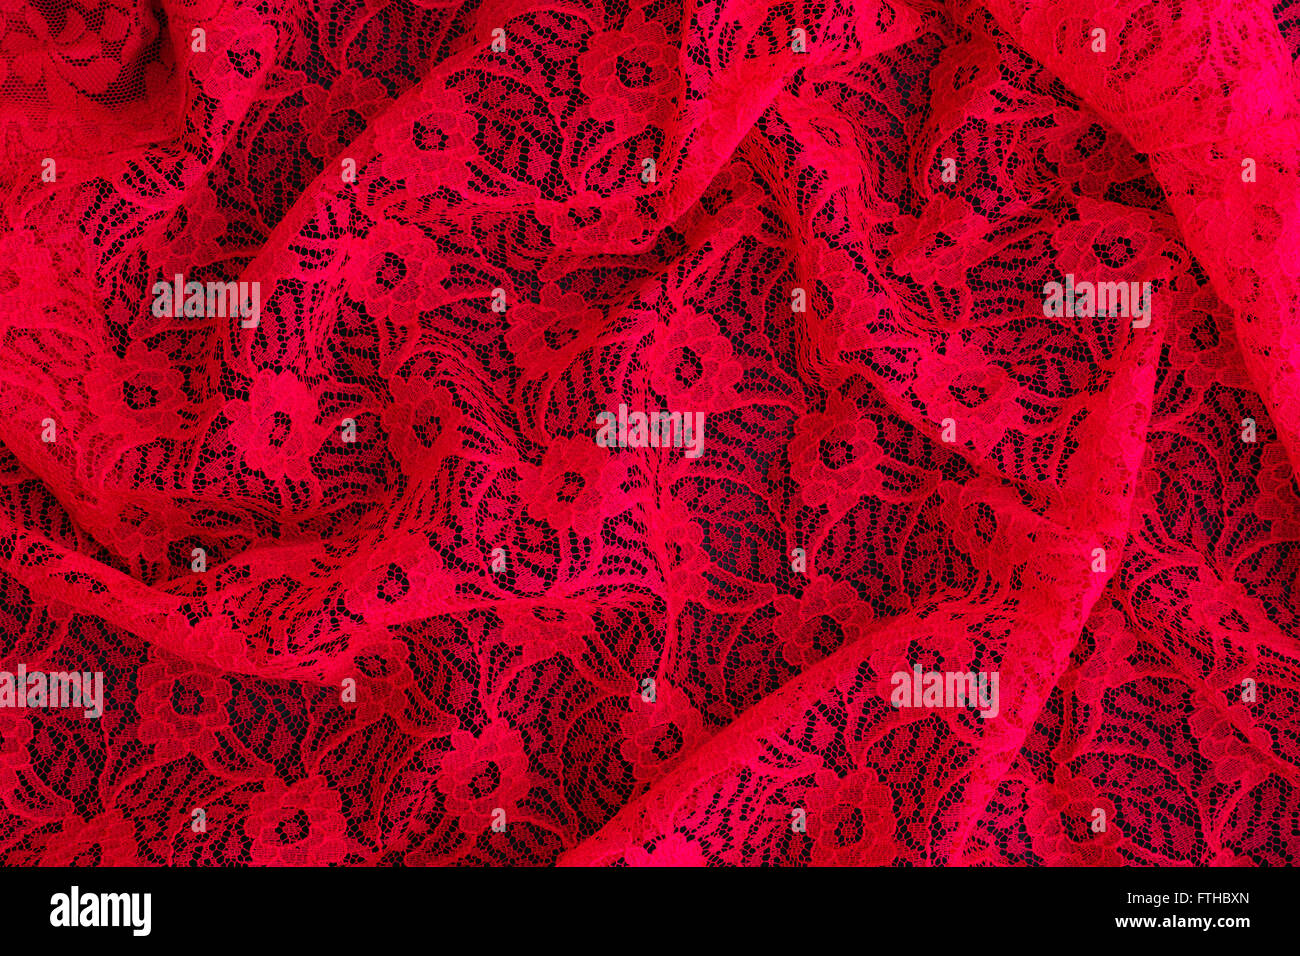 85,746 Red Lace Texture Images, Stock Photos, 3D objects, & Vectors